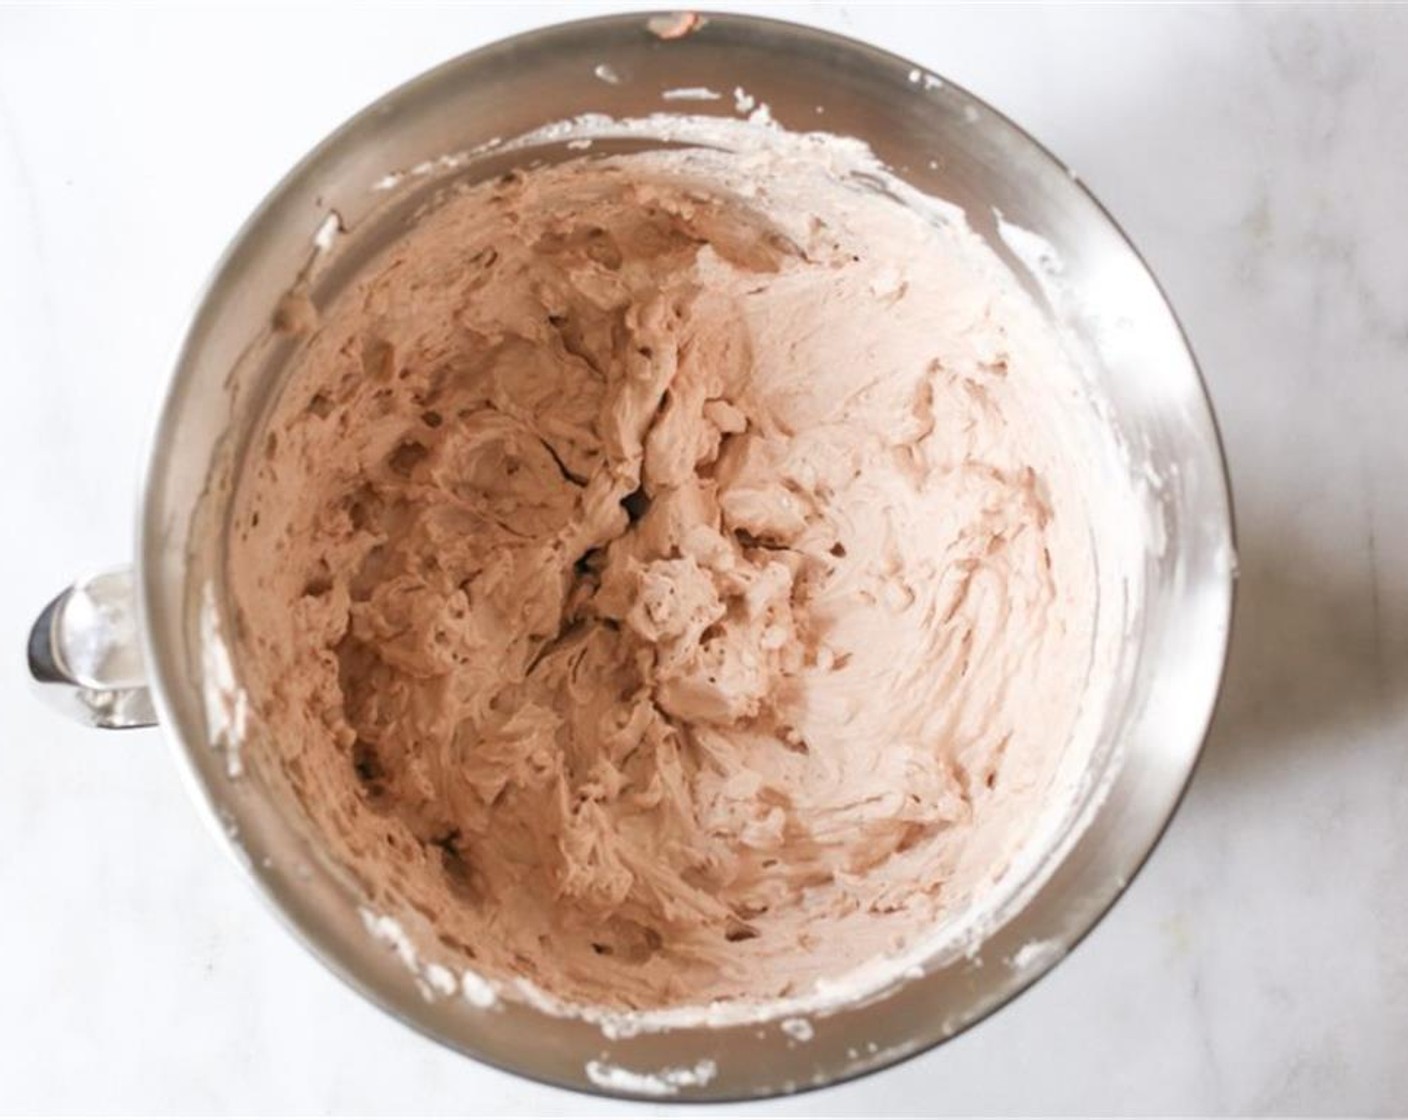 step 2 Transfer the Nutella cream cheese to the bowl of a stand mixer and add the Heavy Cream (3 cups). Mix on low speed to combine, then slowly increase the speed of medium. Mix until firm peaks form, about 4-5 minutes.